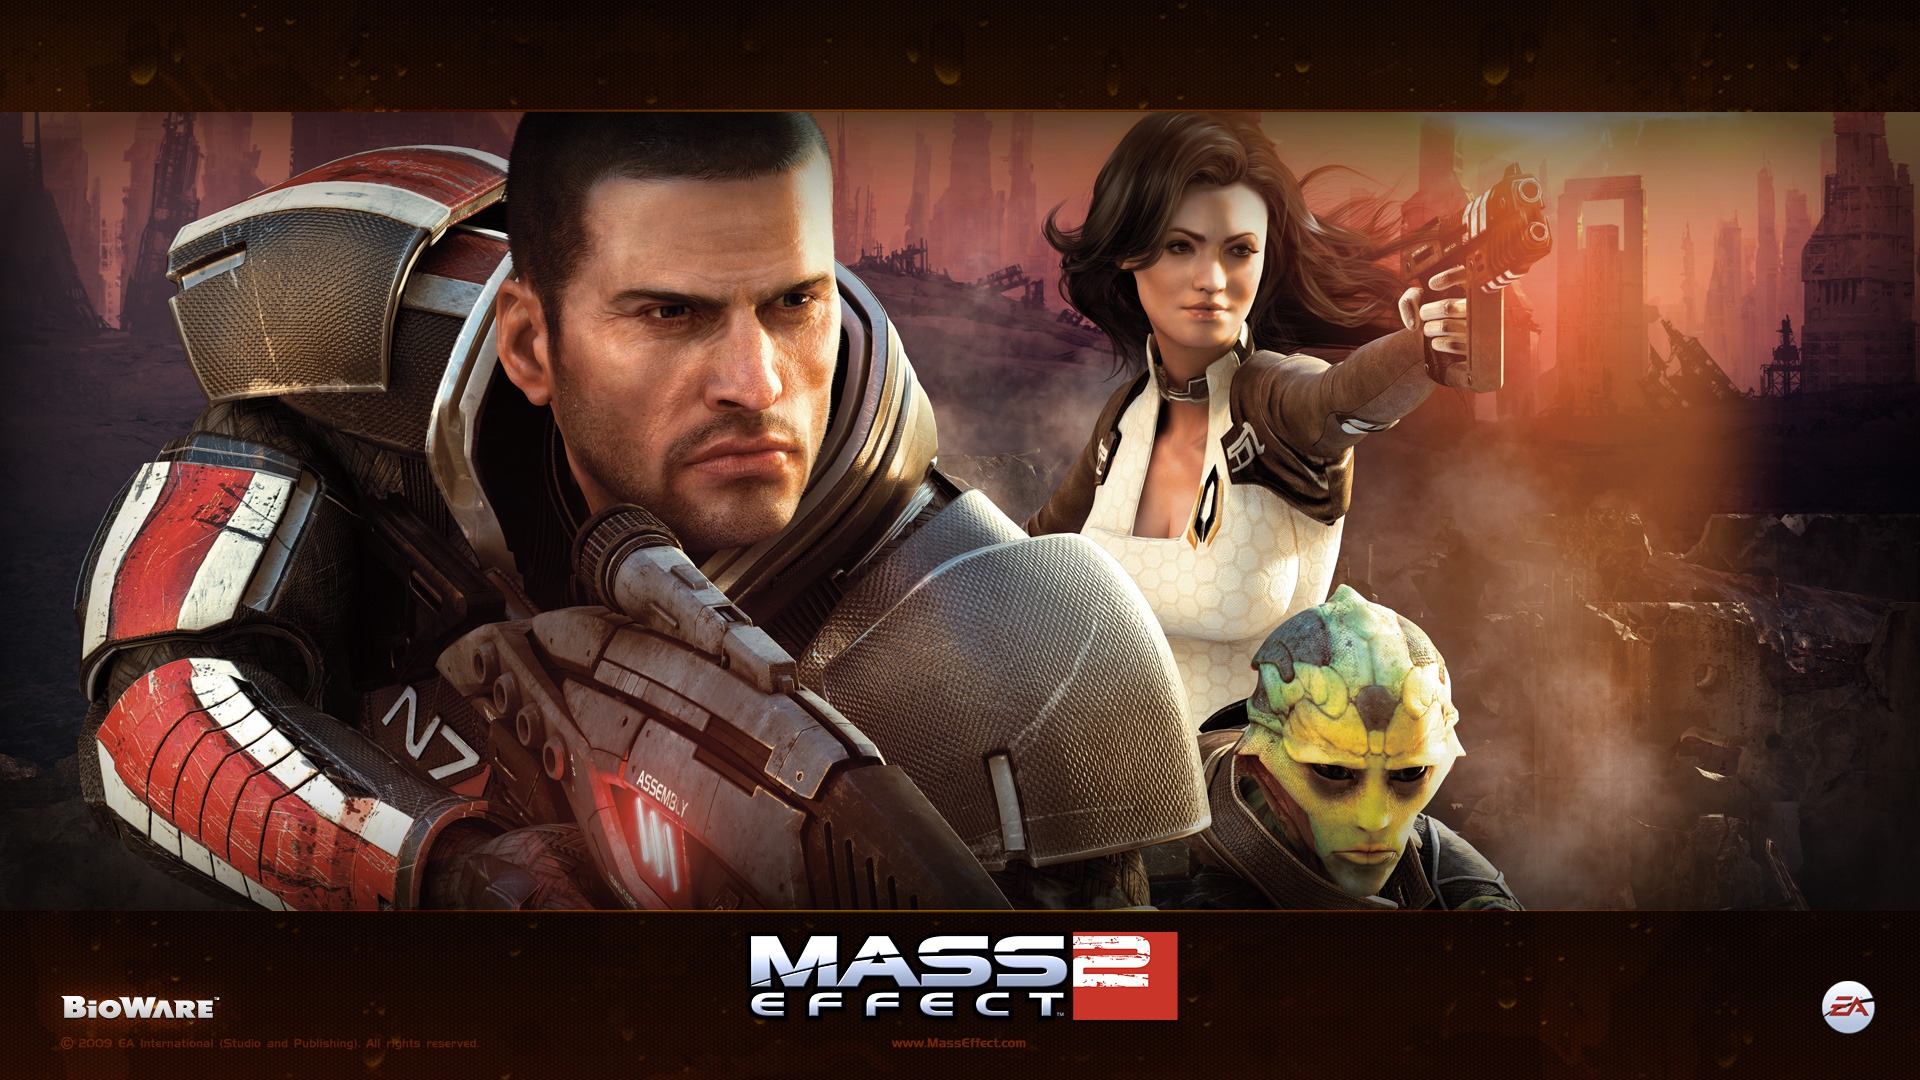 Mass Effect 2 Game for 1920 x 1080 HDTV 1080p resolution